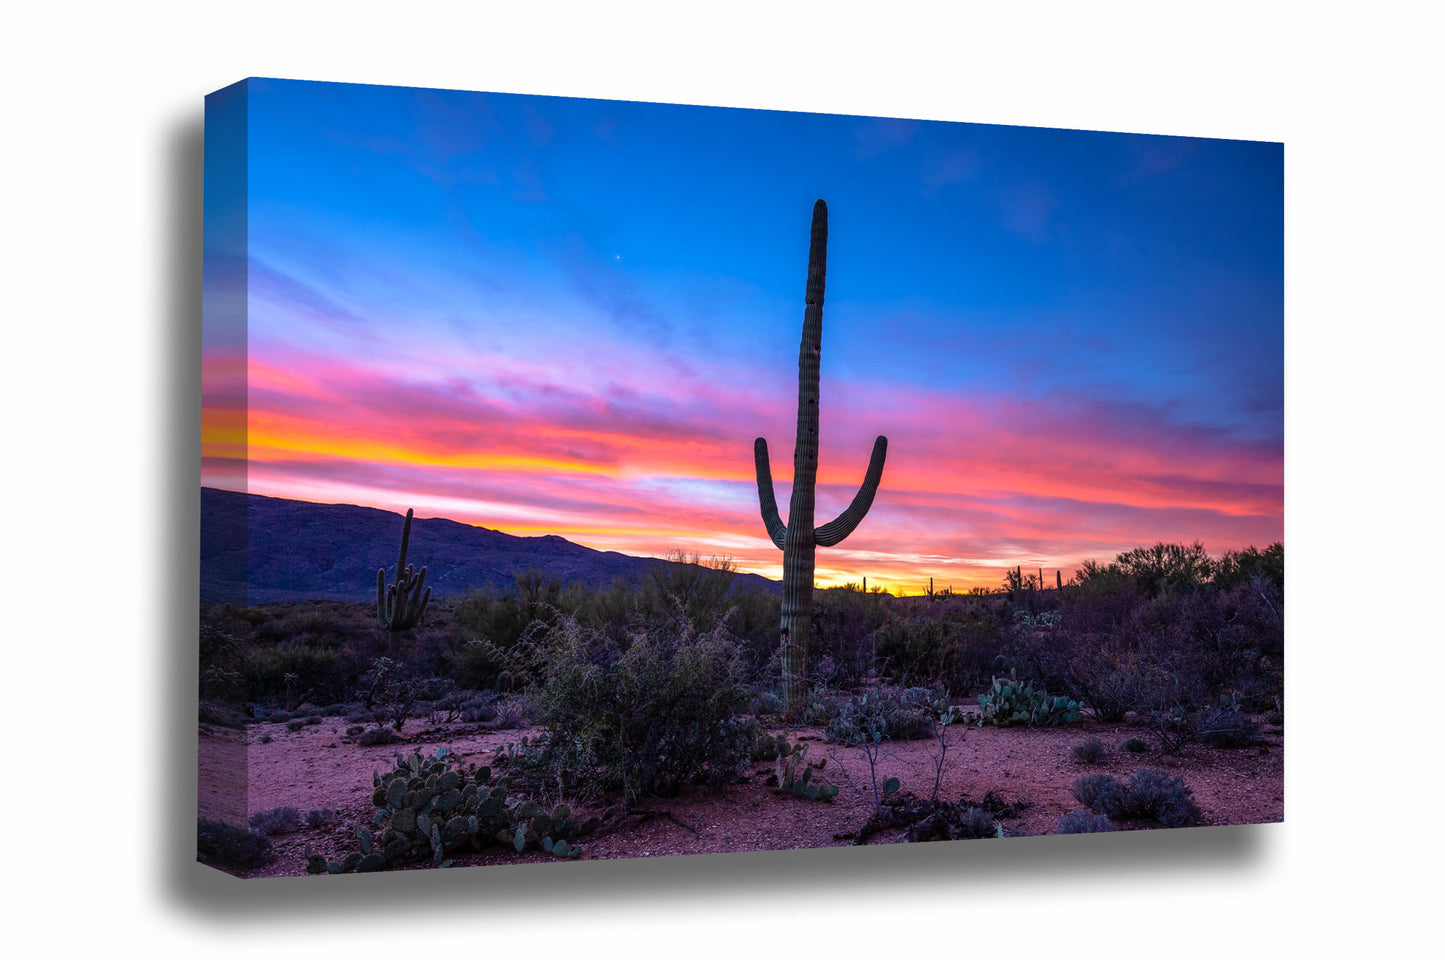 Southwestern canvas wall art of a saguaro cactus standing tall over the Sonoran Desert floor at sunrise in Saguaro National Park near Tucson, Arizona by Sean Ramsey of Southern Plains Photography.